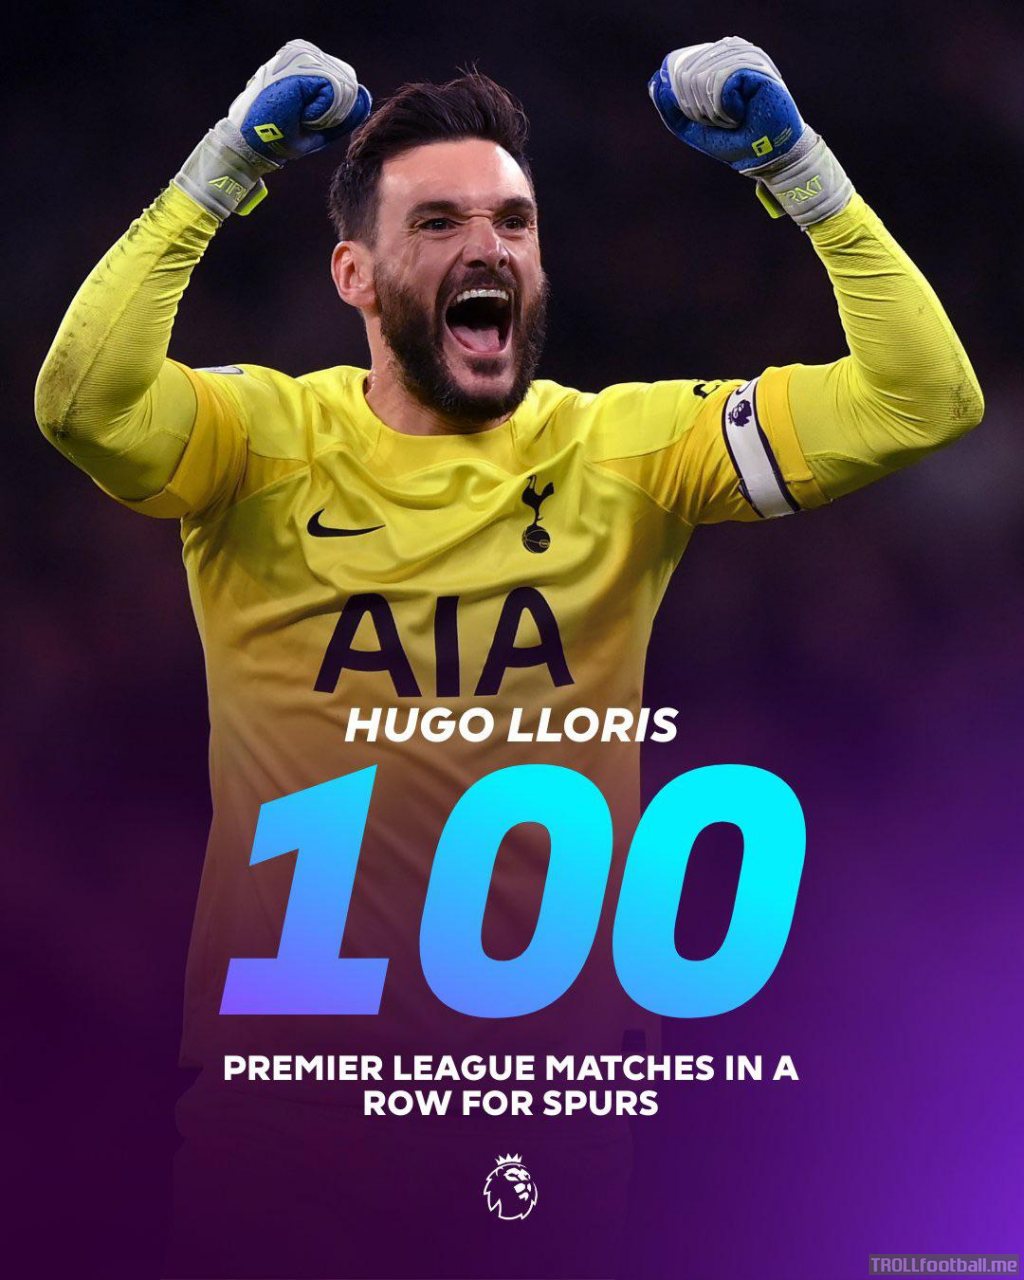 [Premier League] Hugo Lloris will be the only PL player on a century of consecutive appearances